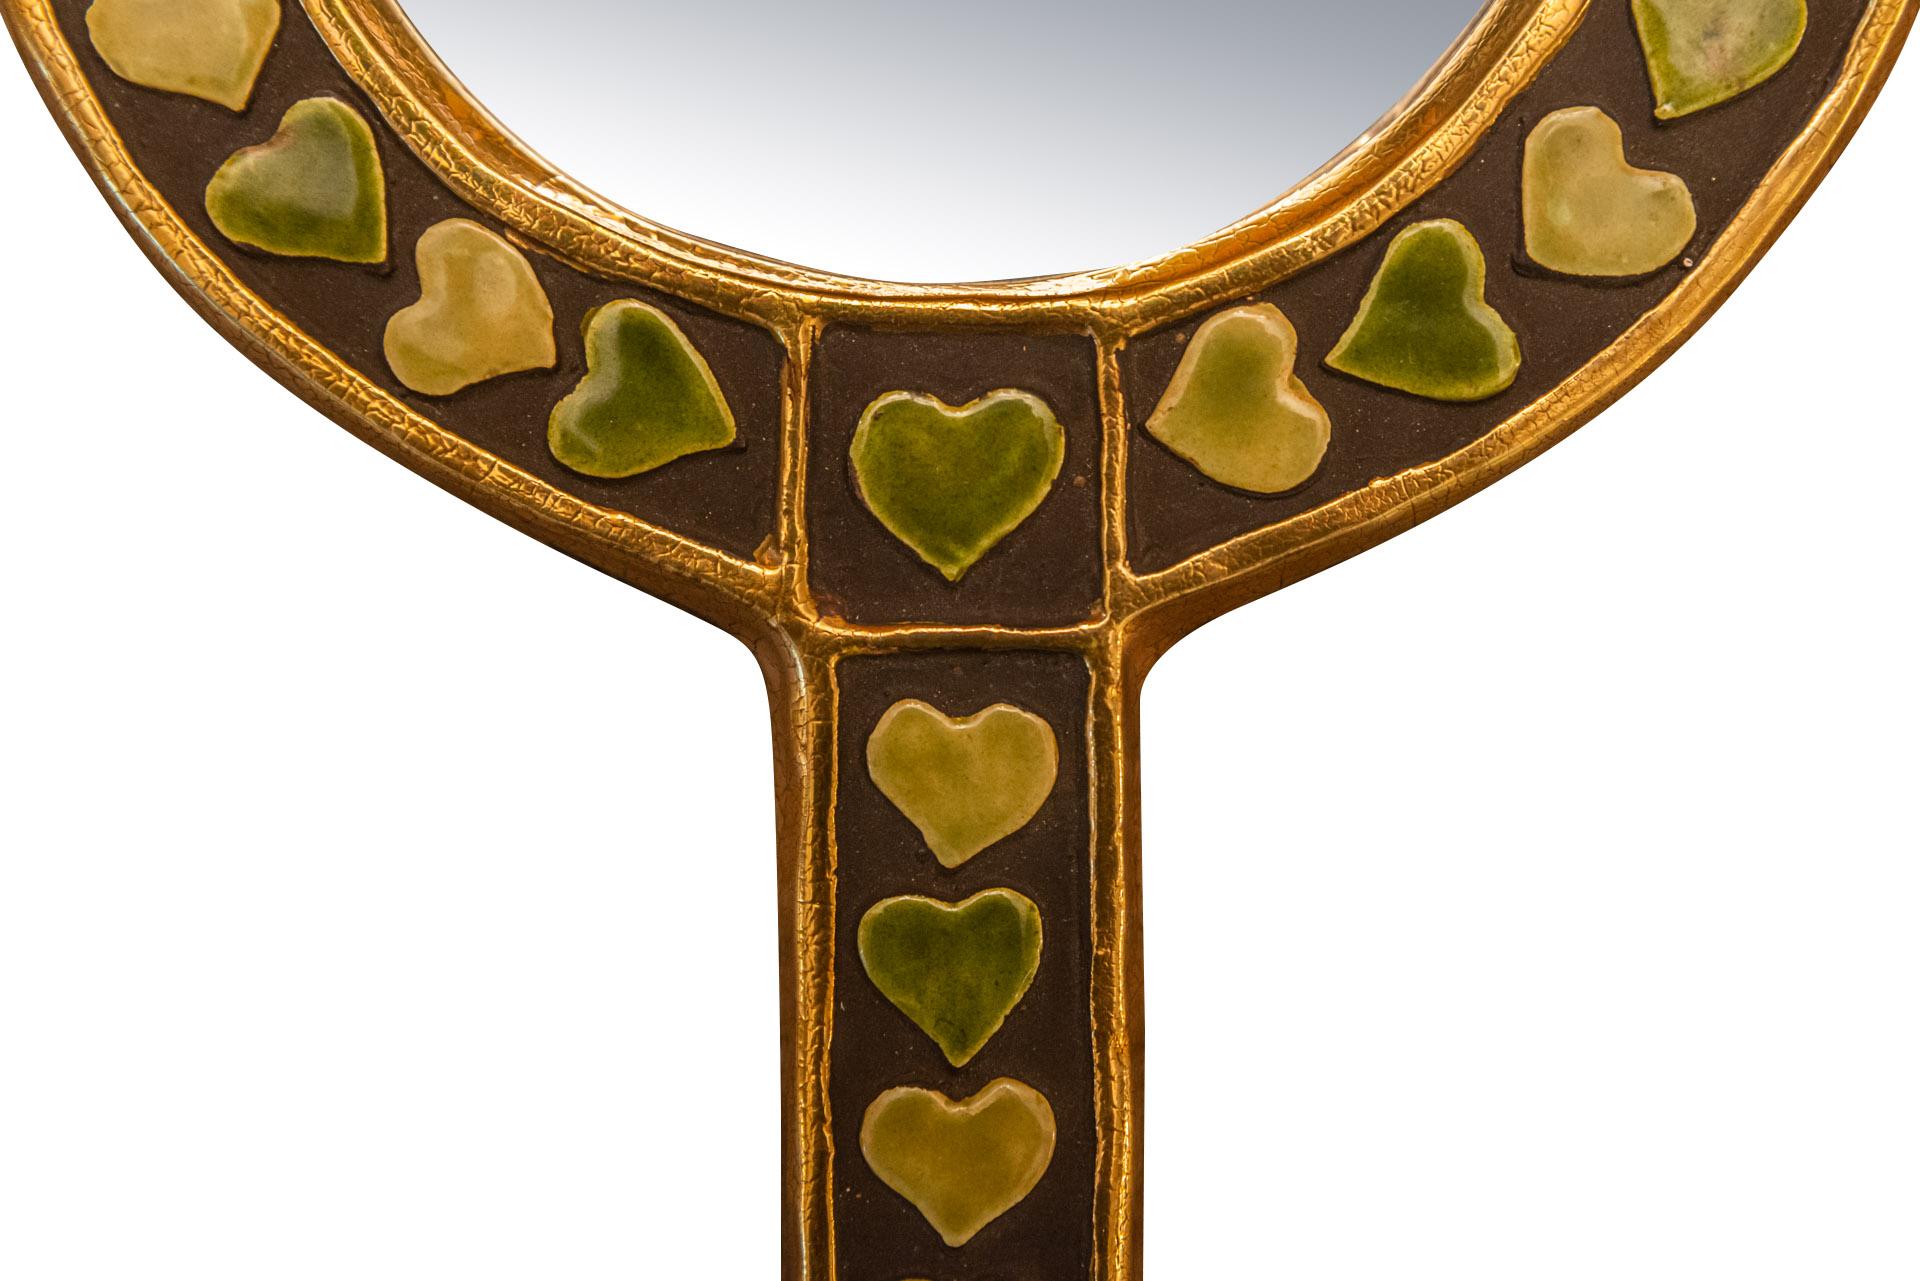 Mithé Espelt (1923-2020-, hand facing mirror, 
Green and gold enameled ceramic decorated with small hearts,
Wrapped in green velvet on the back,
Unsigned,
circa 1960, France. 

Measures : Height 24 cm, diameter 16,5 cm.

Mithé Espelt